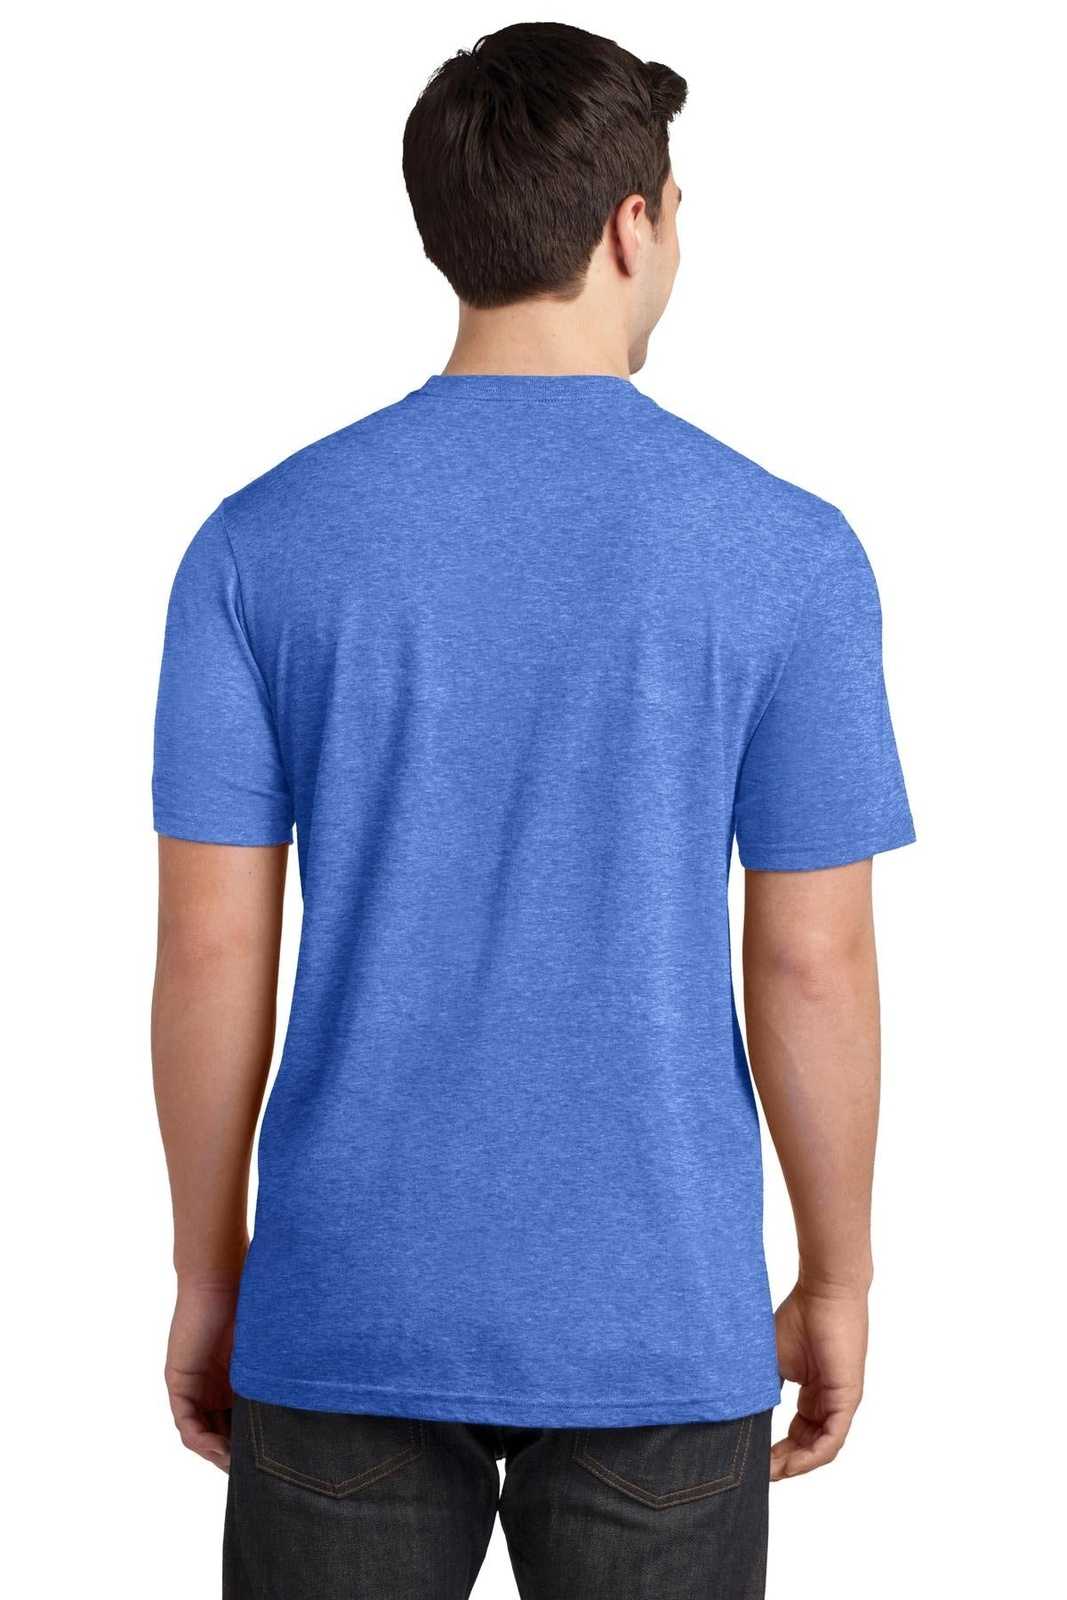 District DT6000P Very Important Tee with Pocket - Heathered Royal - HIT a Double - 2